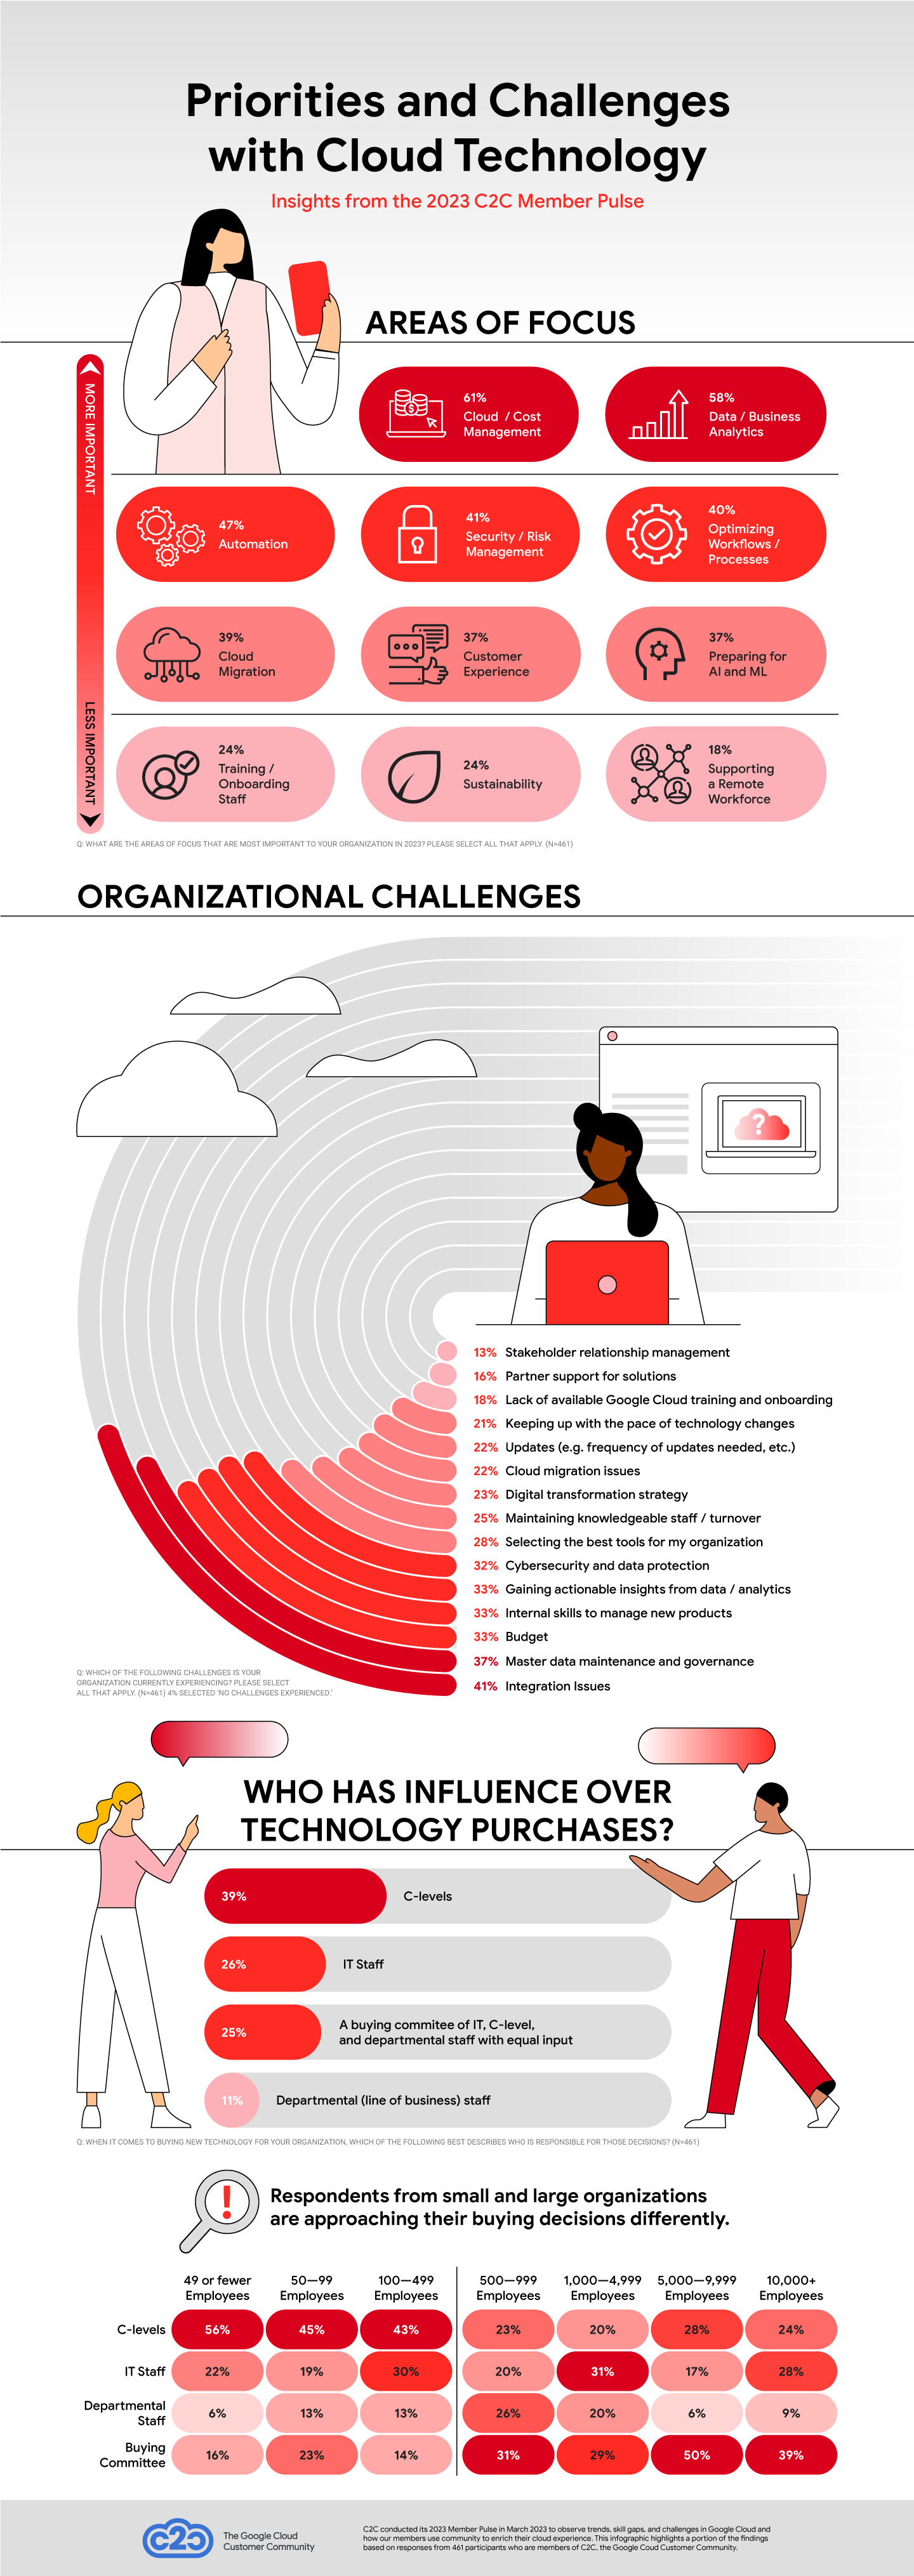 Infographic detailing priorities and challenges of using cloud technology, as observed from responses of C2C members who participated in the 2023 Member Pulse survey.